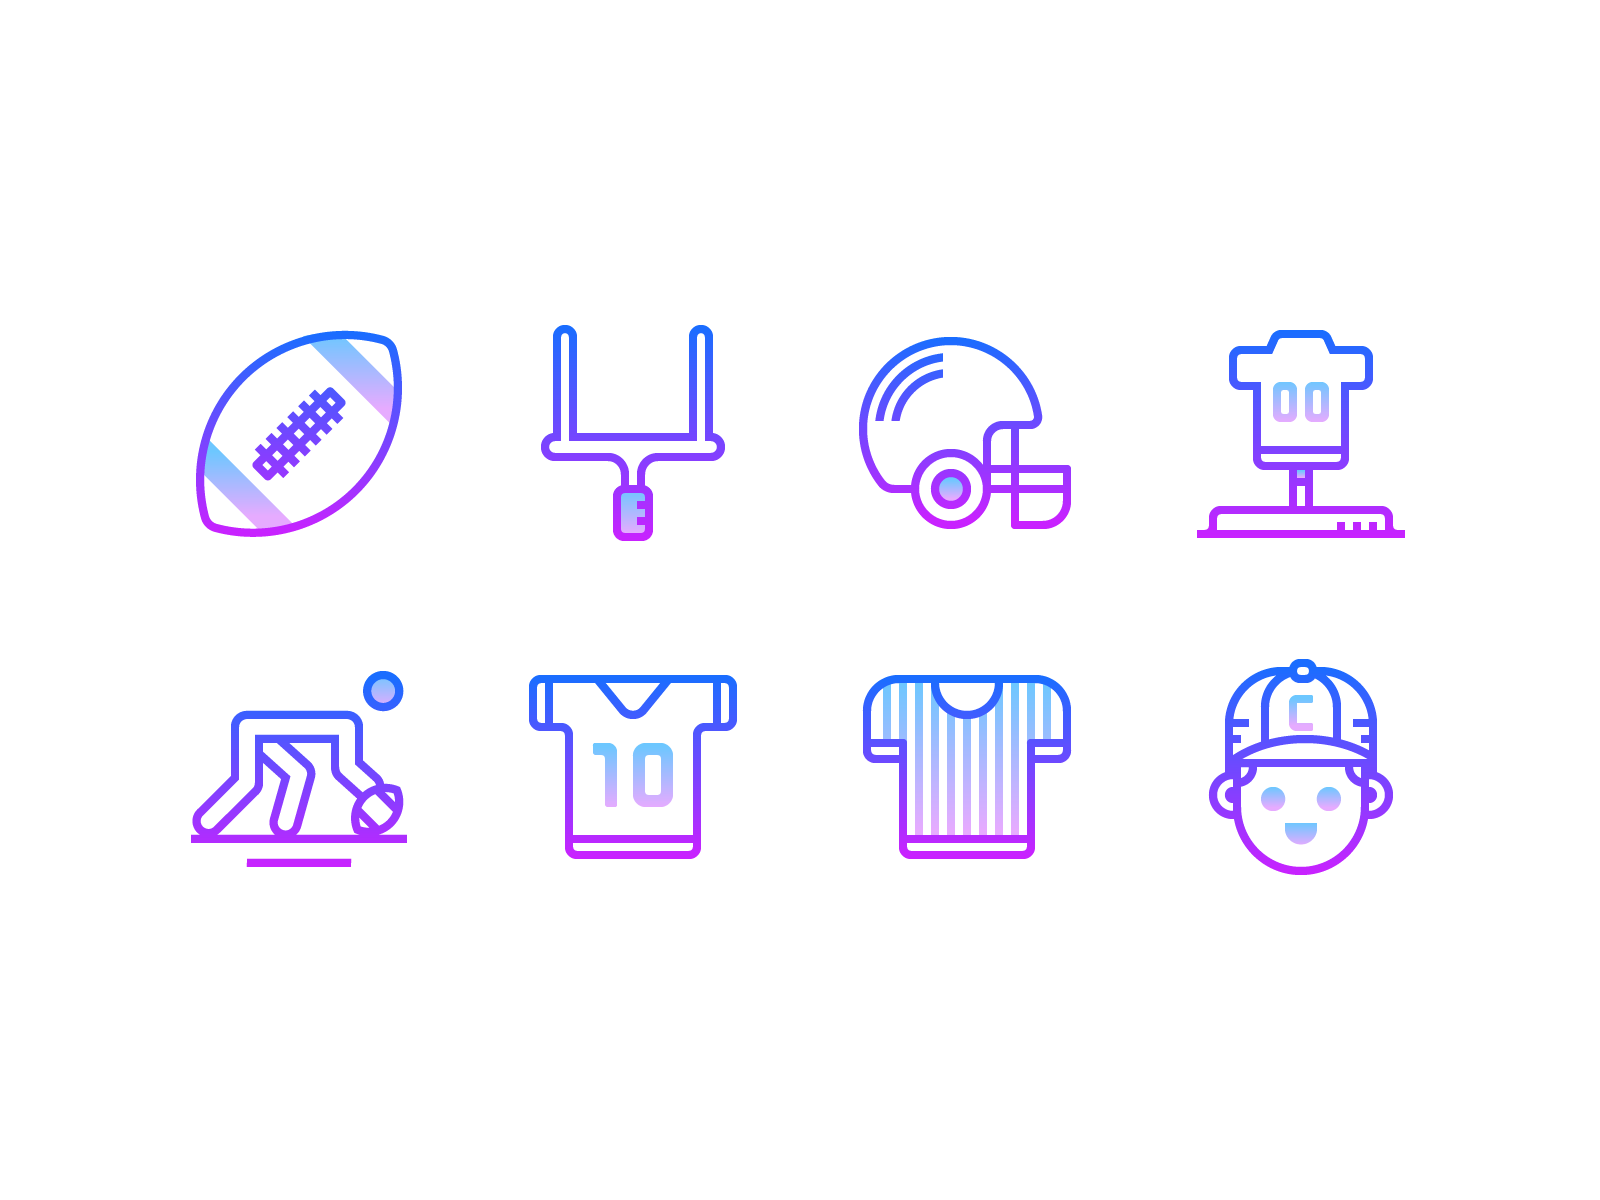 Gradient line: American football gradient icon super bowl helmet nfl referee american football sport soccer football vector graphics graphic design ux design ui design outline icon infographics illustration icons design icons pack icons set icons